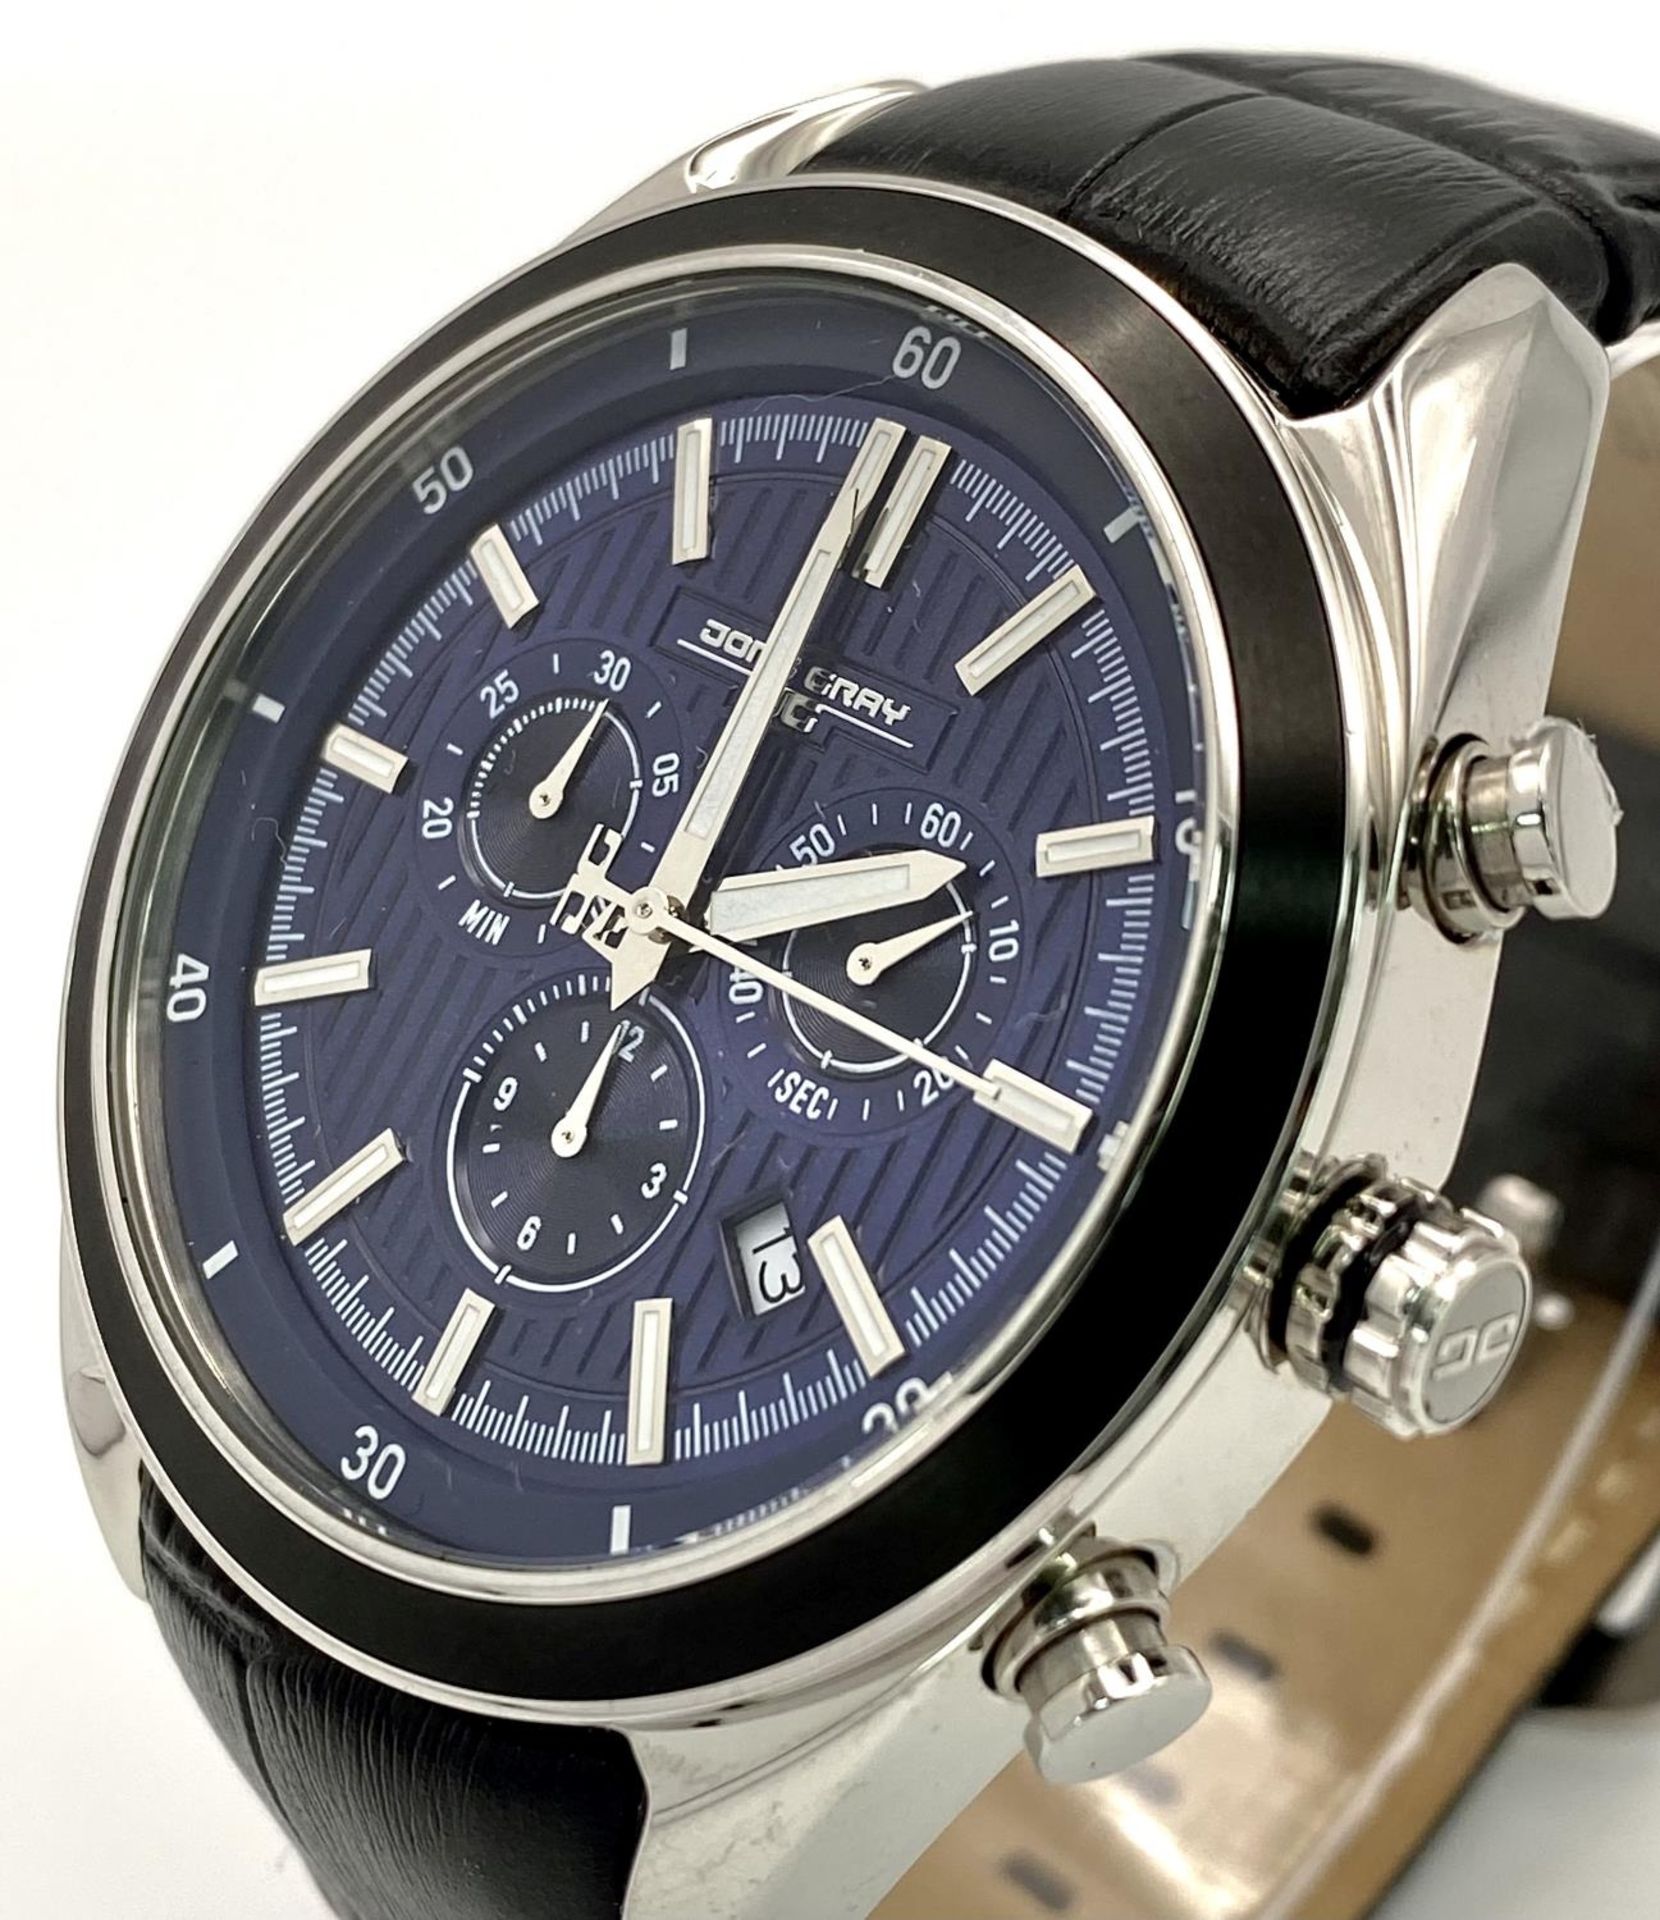 A Jorg Gray Chronograph Gents Watch. Black leather strap. Stainless steel case - 45mm. Blue dial - Image 3 of 8